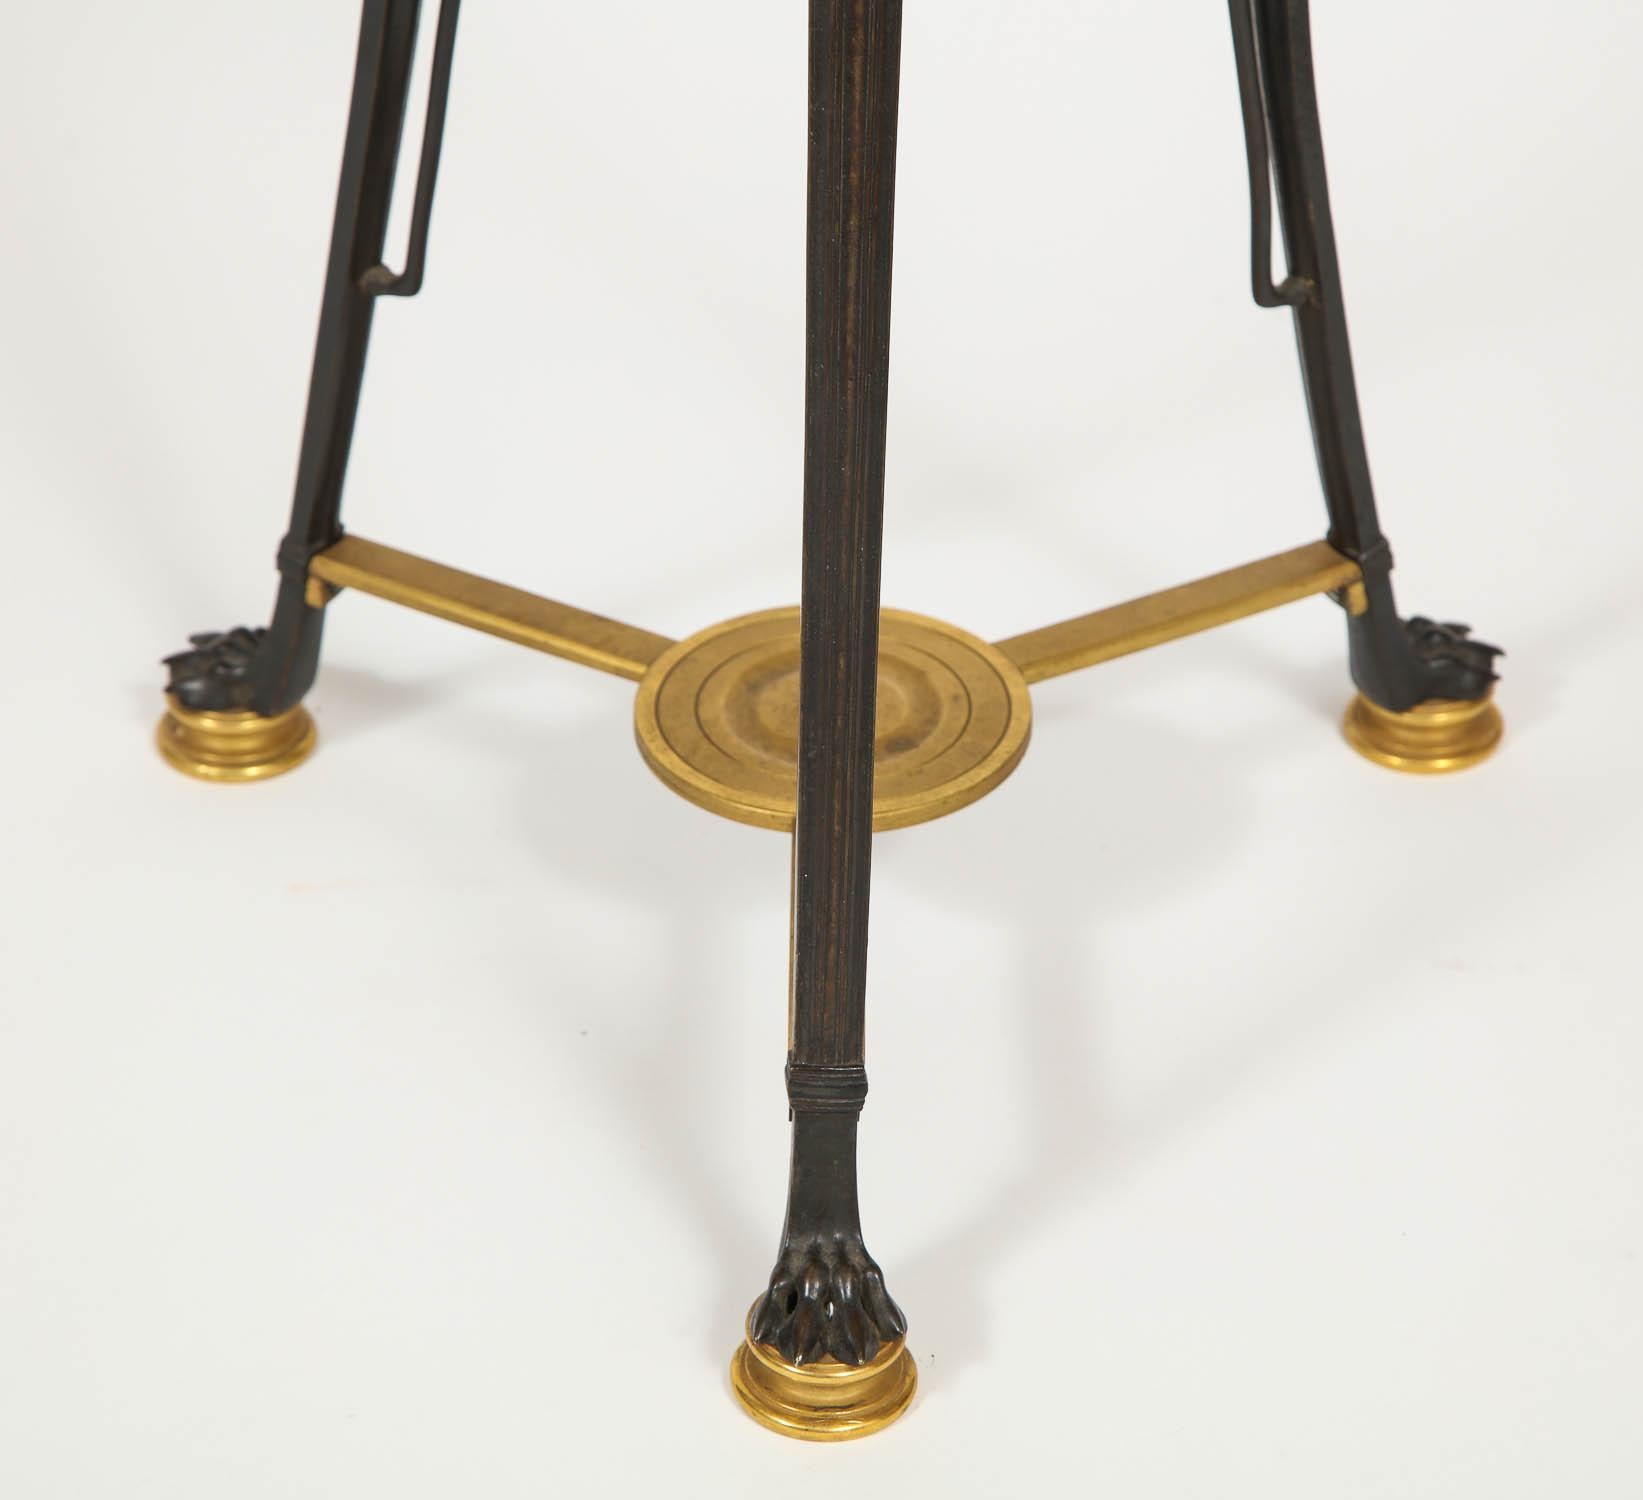 A Beautifully Designed Small Patinated and Dore Bronze French Side Table, Attributed to F. Barbedienne, the Magnificent French Metalworker and Manufacturer.  This beautifully cast and hand-chased Empire/ Neo-Grec side table has been beautifully